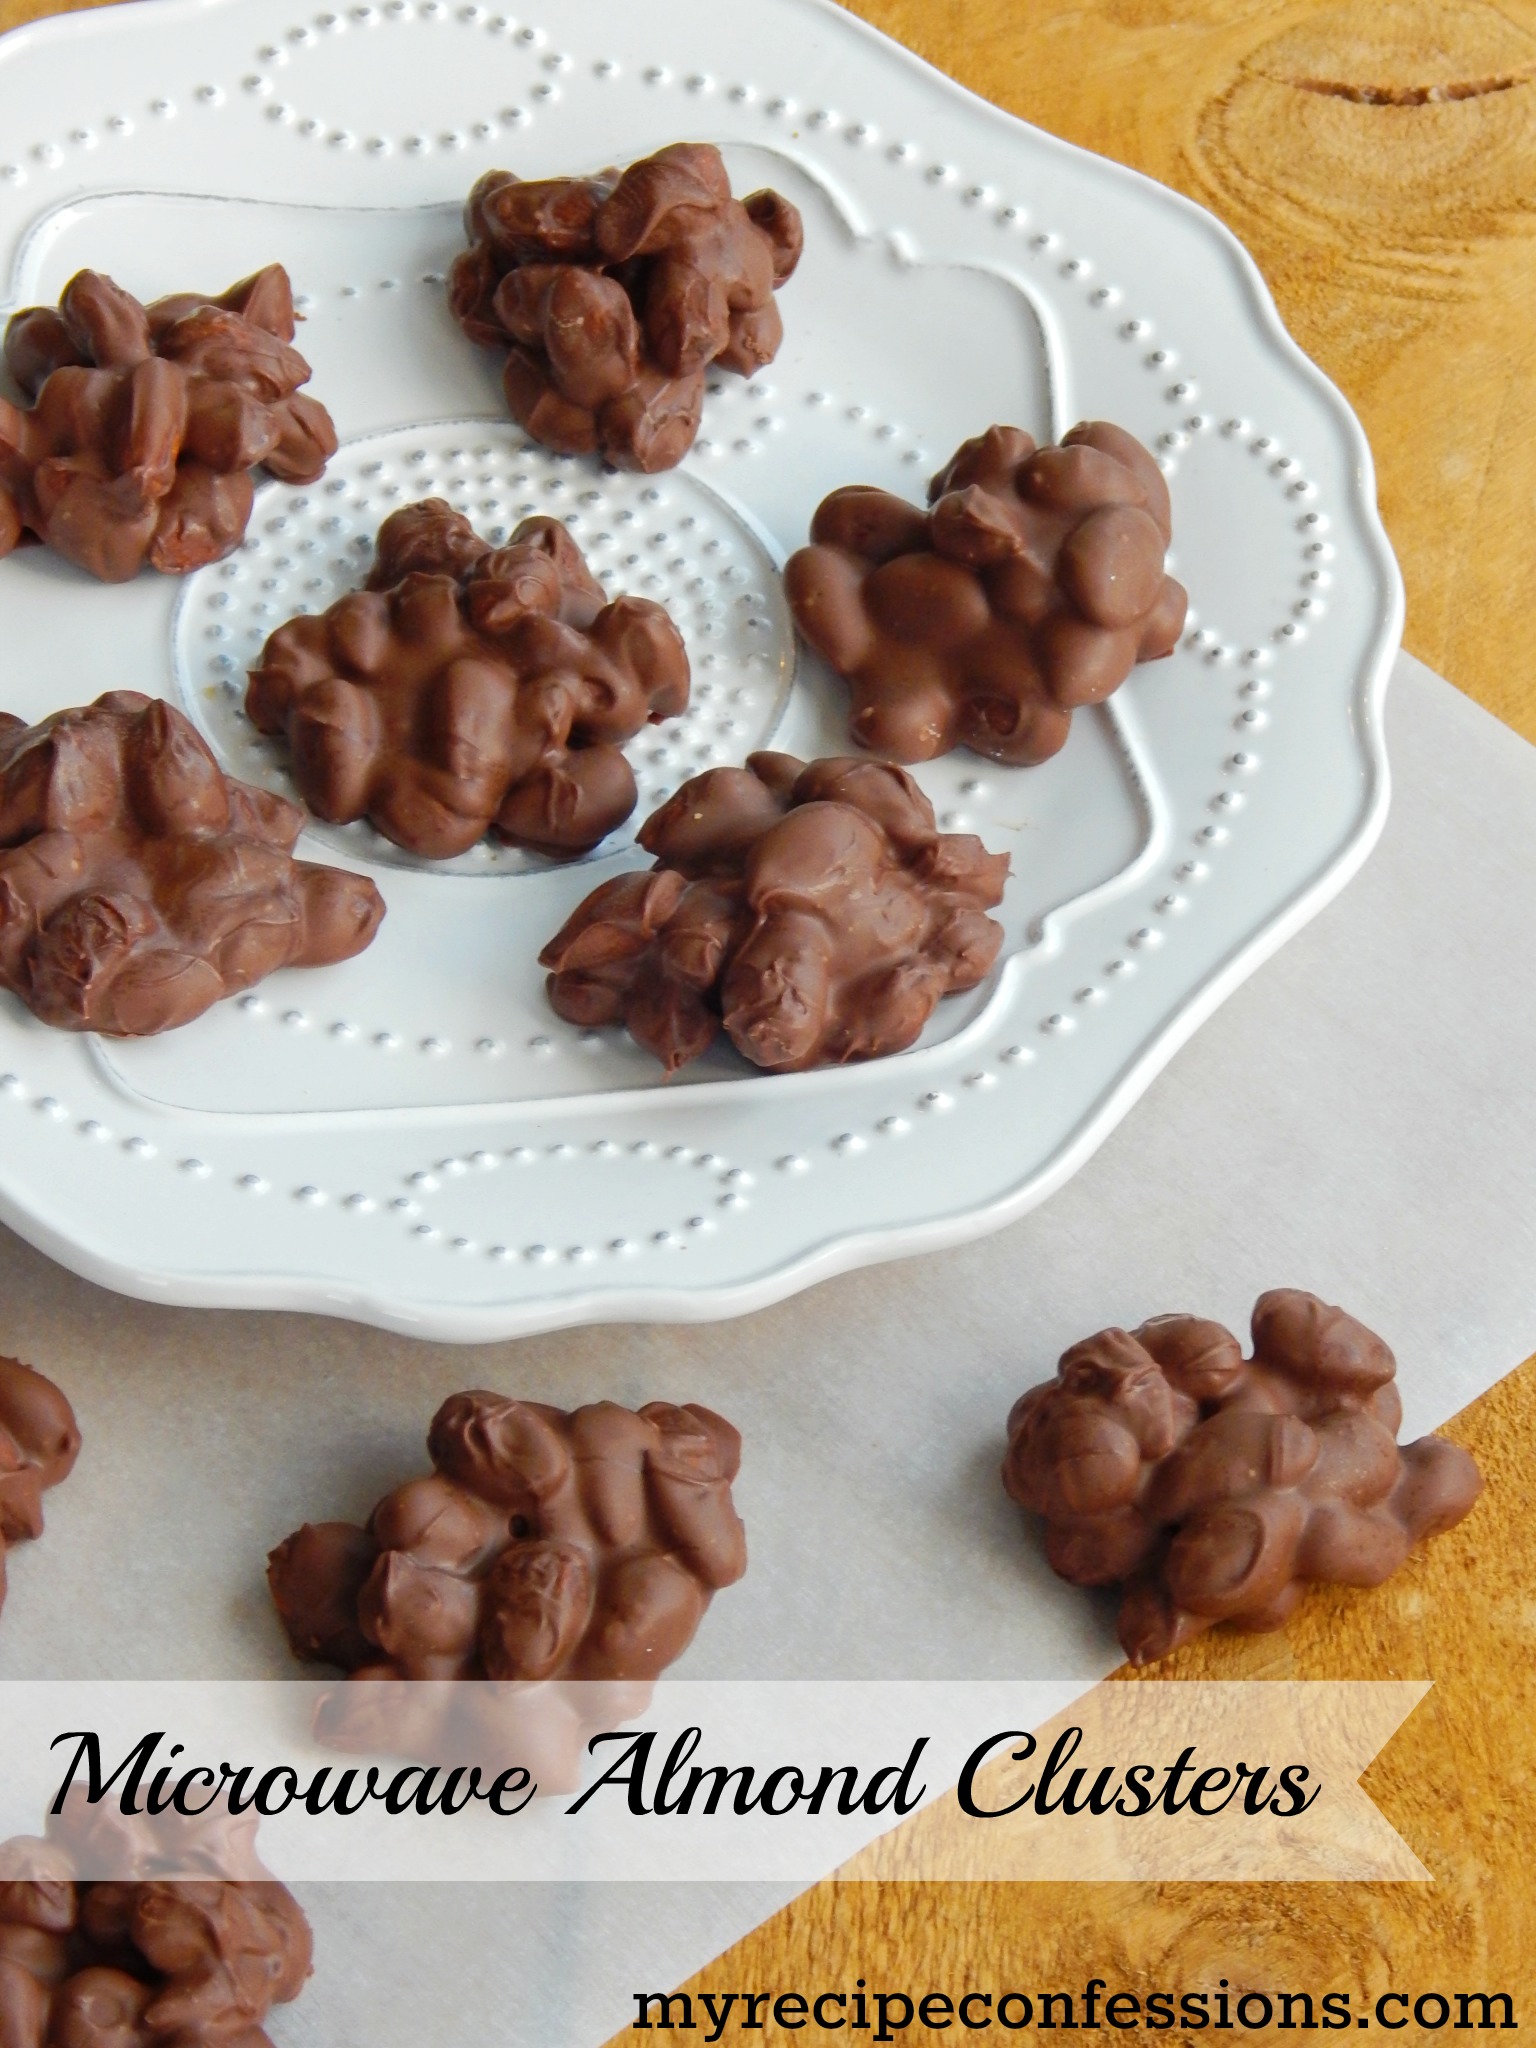 Easy Chocolate Almond Clusters Recipe (2 Ingredients) - The Sweet Savory  Life — The Sweet Savory Life